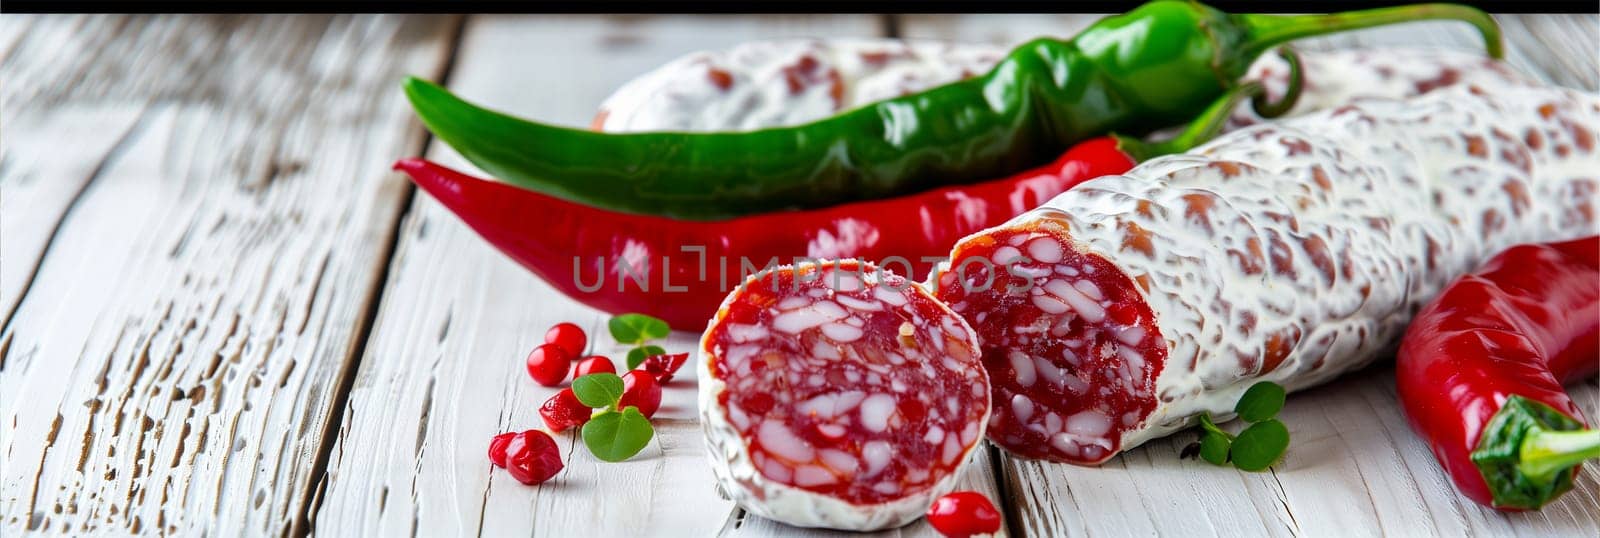 Sliced cured salami rolls are artfully arranged beside vibrant red and green chili peppers, garnished with peppercorns on a rustic wooden table.